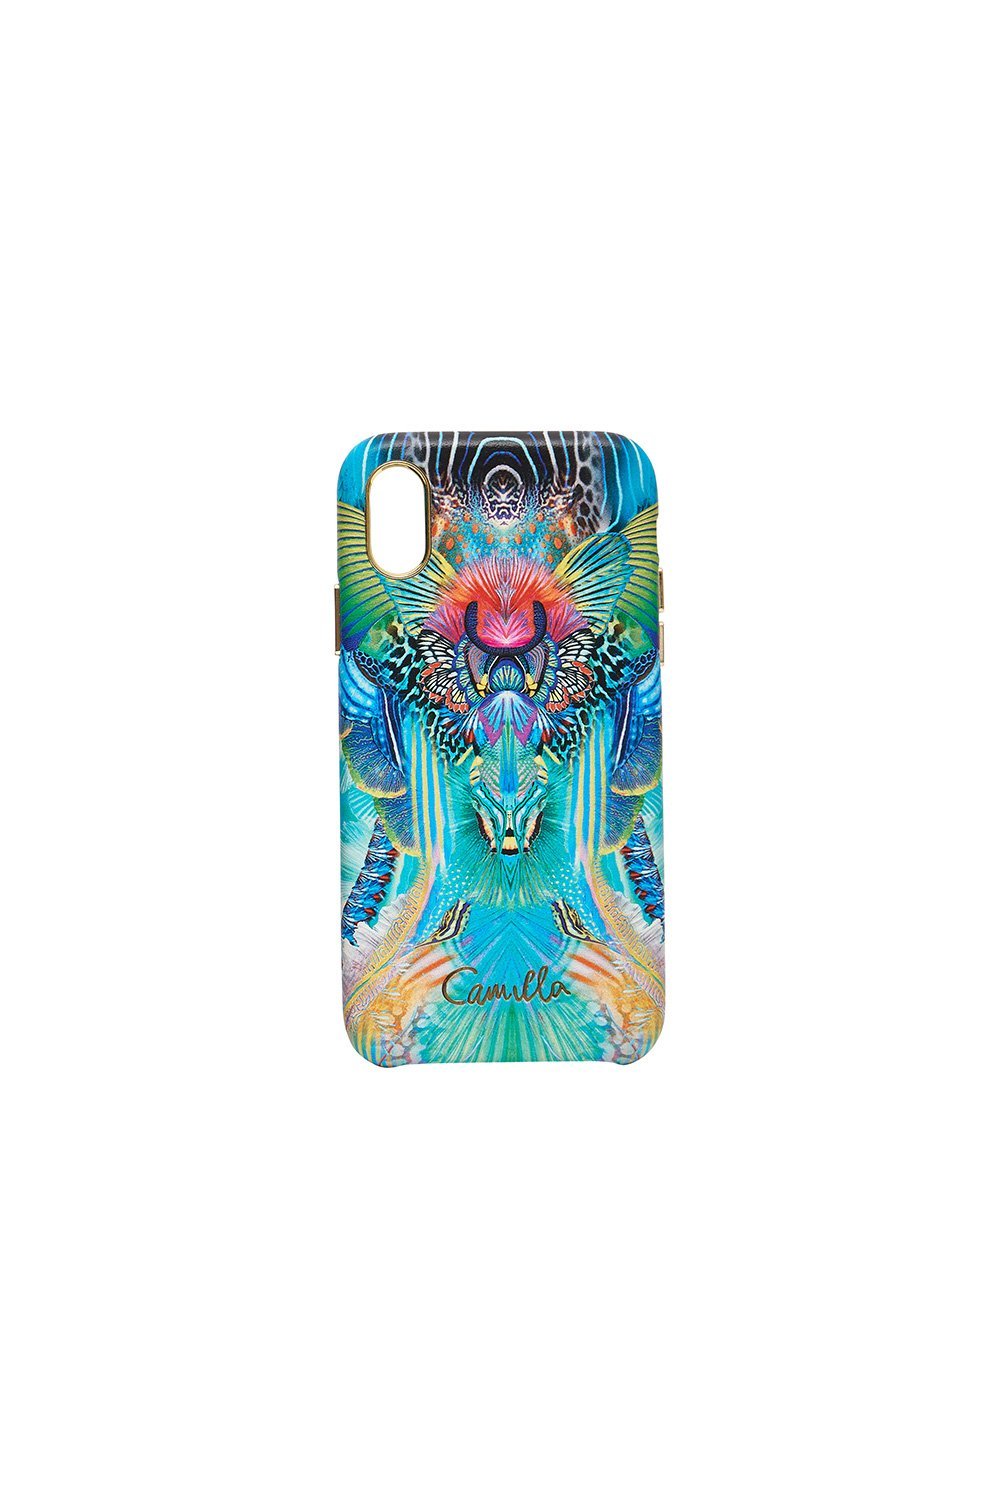 PHONE COVER X REEF WARRIOR